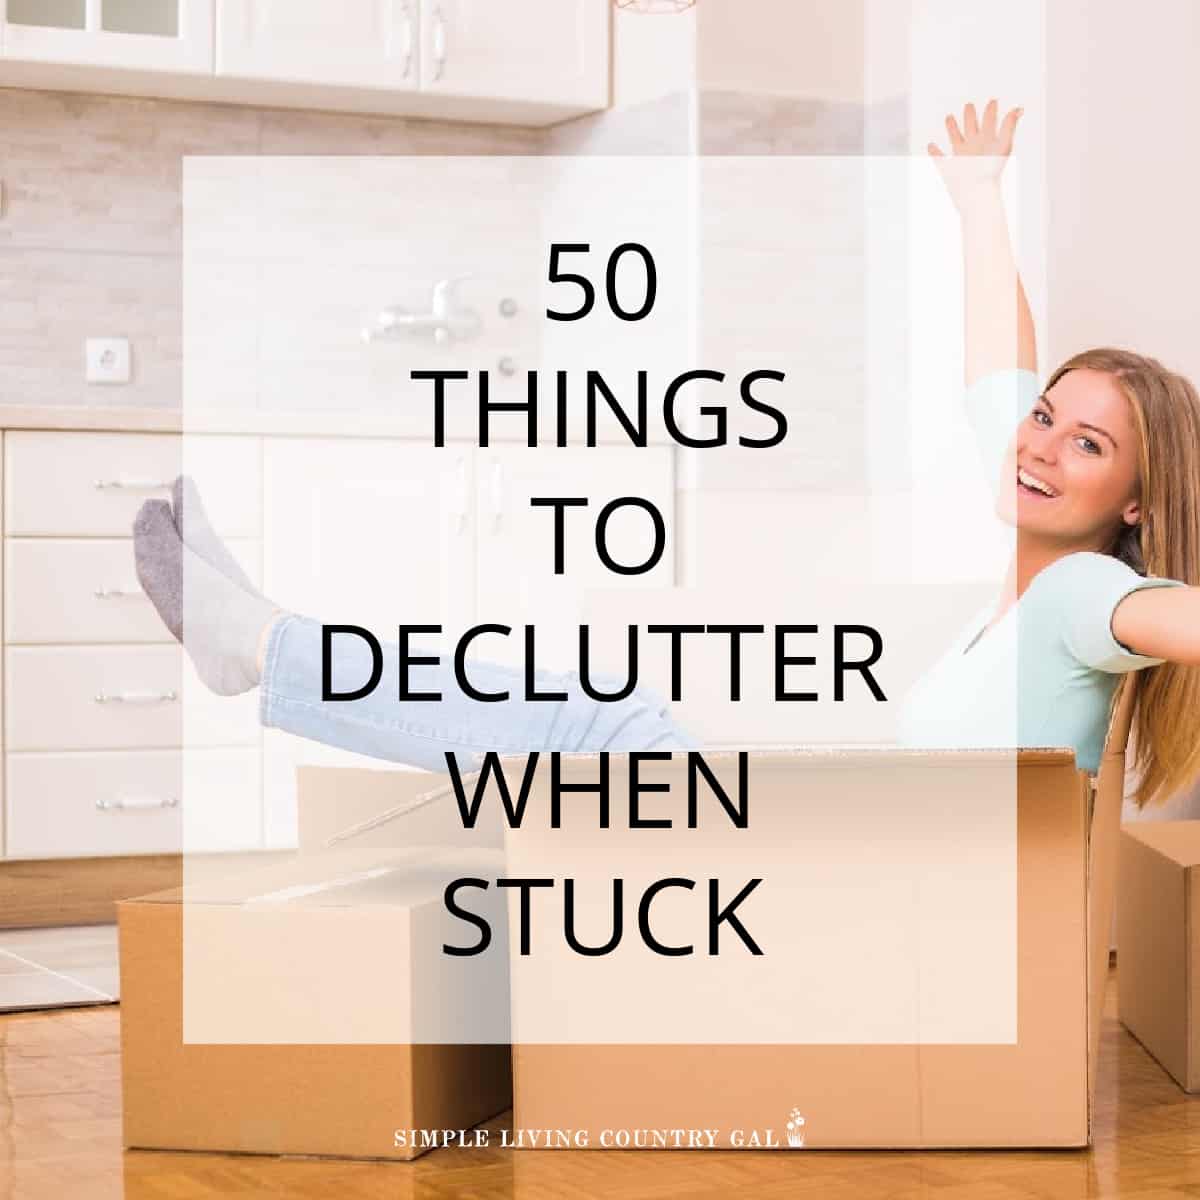 50 Things to Get Rid of Around the House